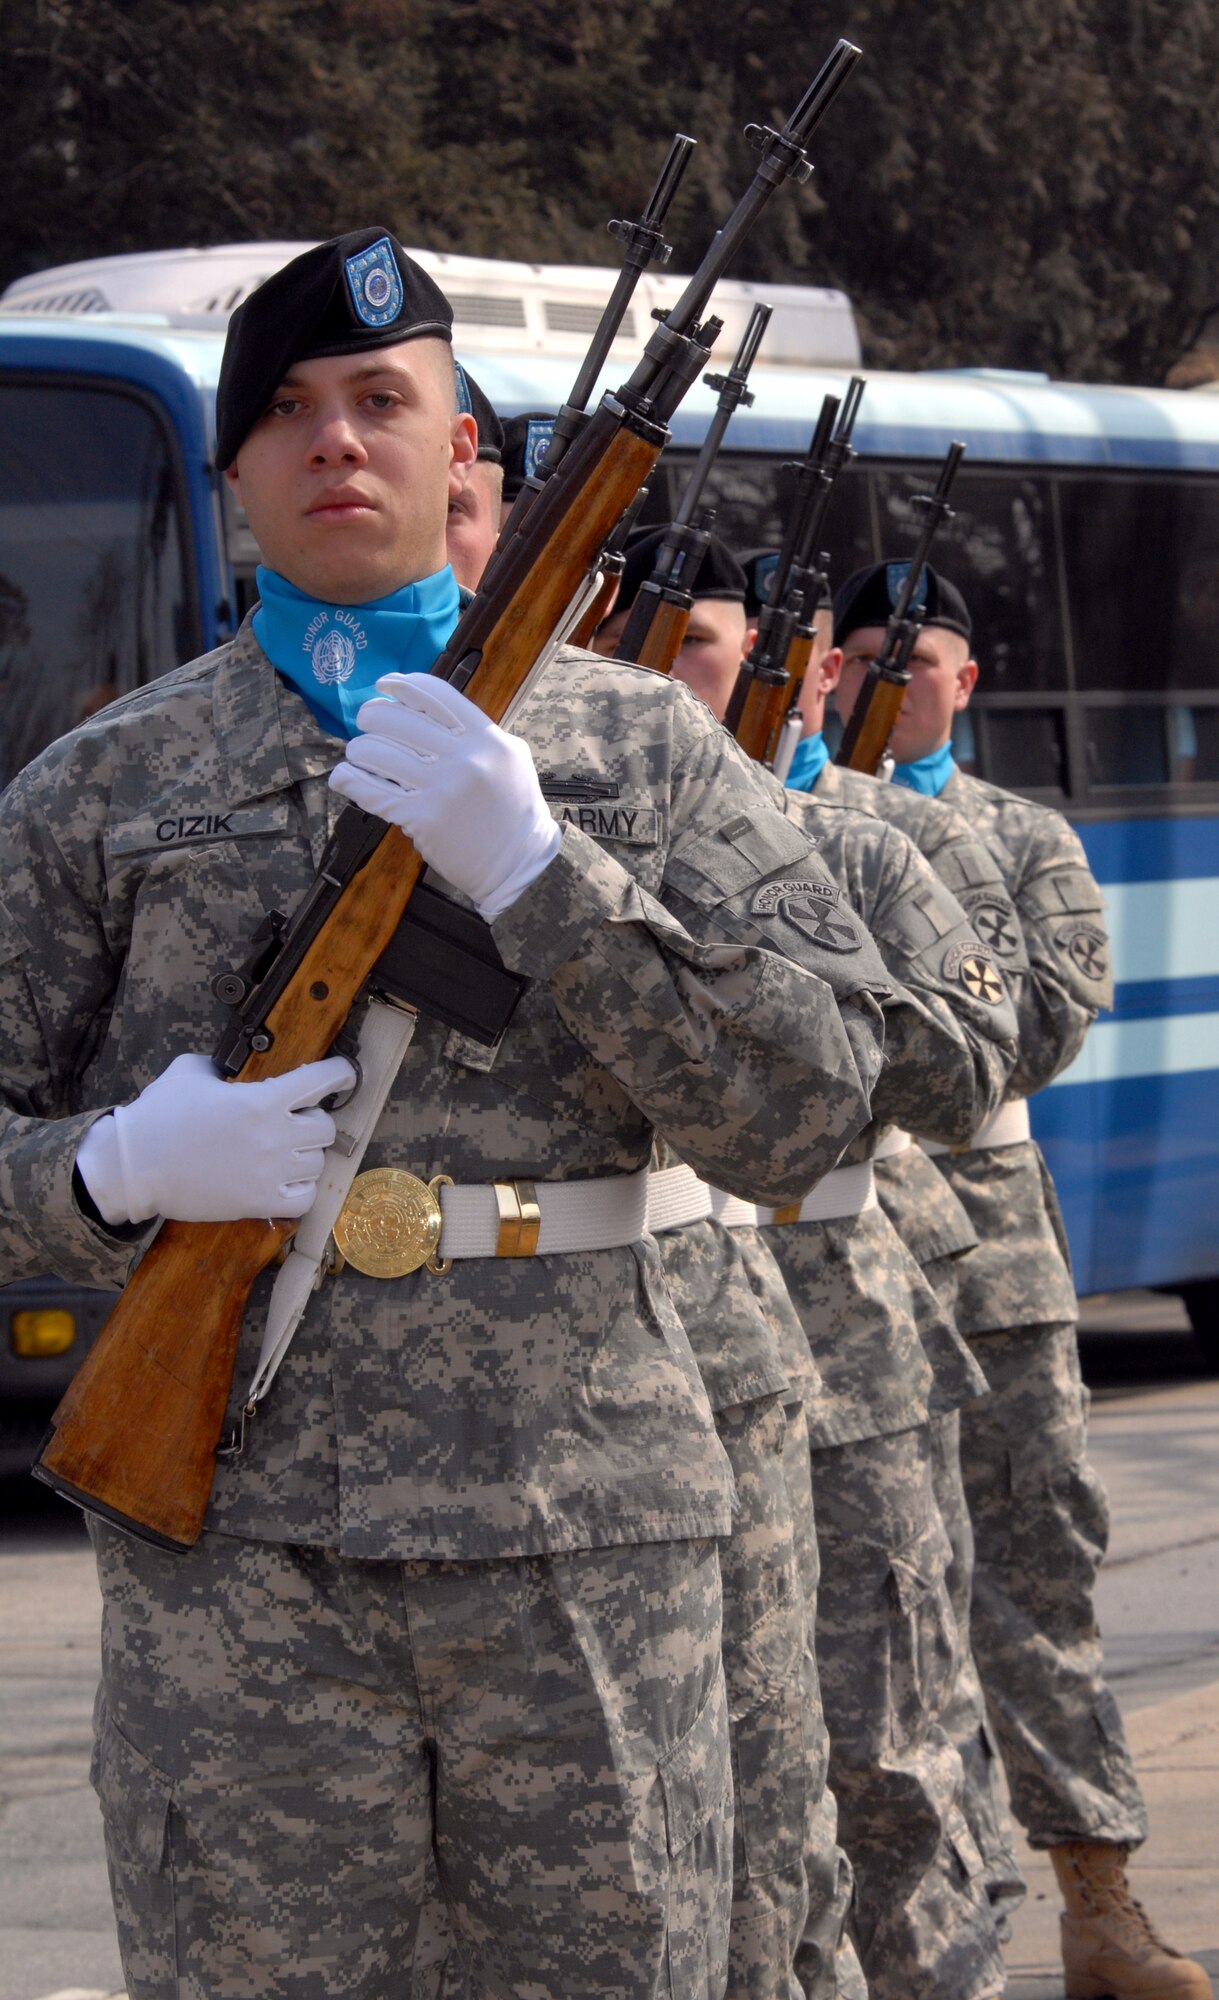 OSAN AIR BASE, Republic of Korea -- Members of the United Nations Honor Guard Firing Party, prepare to fire a 21-gun salute during the Hill 180 ceremony Feb. 21. (U.S. Air Force photo/Staff Sgt. Lakisha Croley)